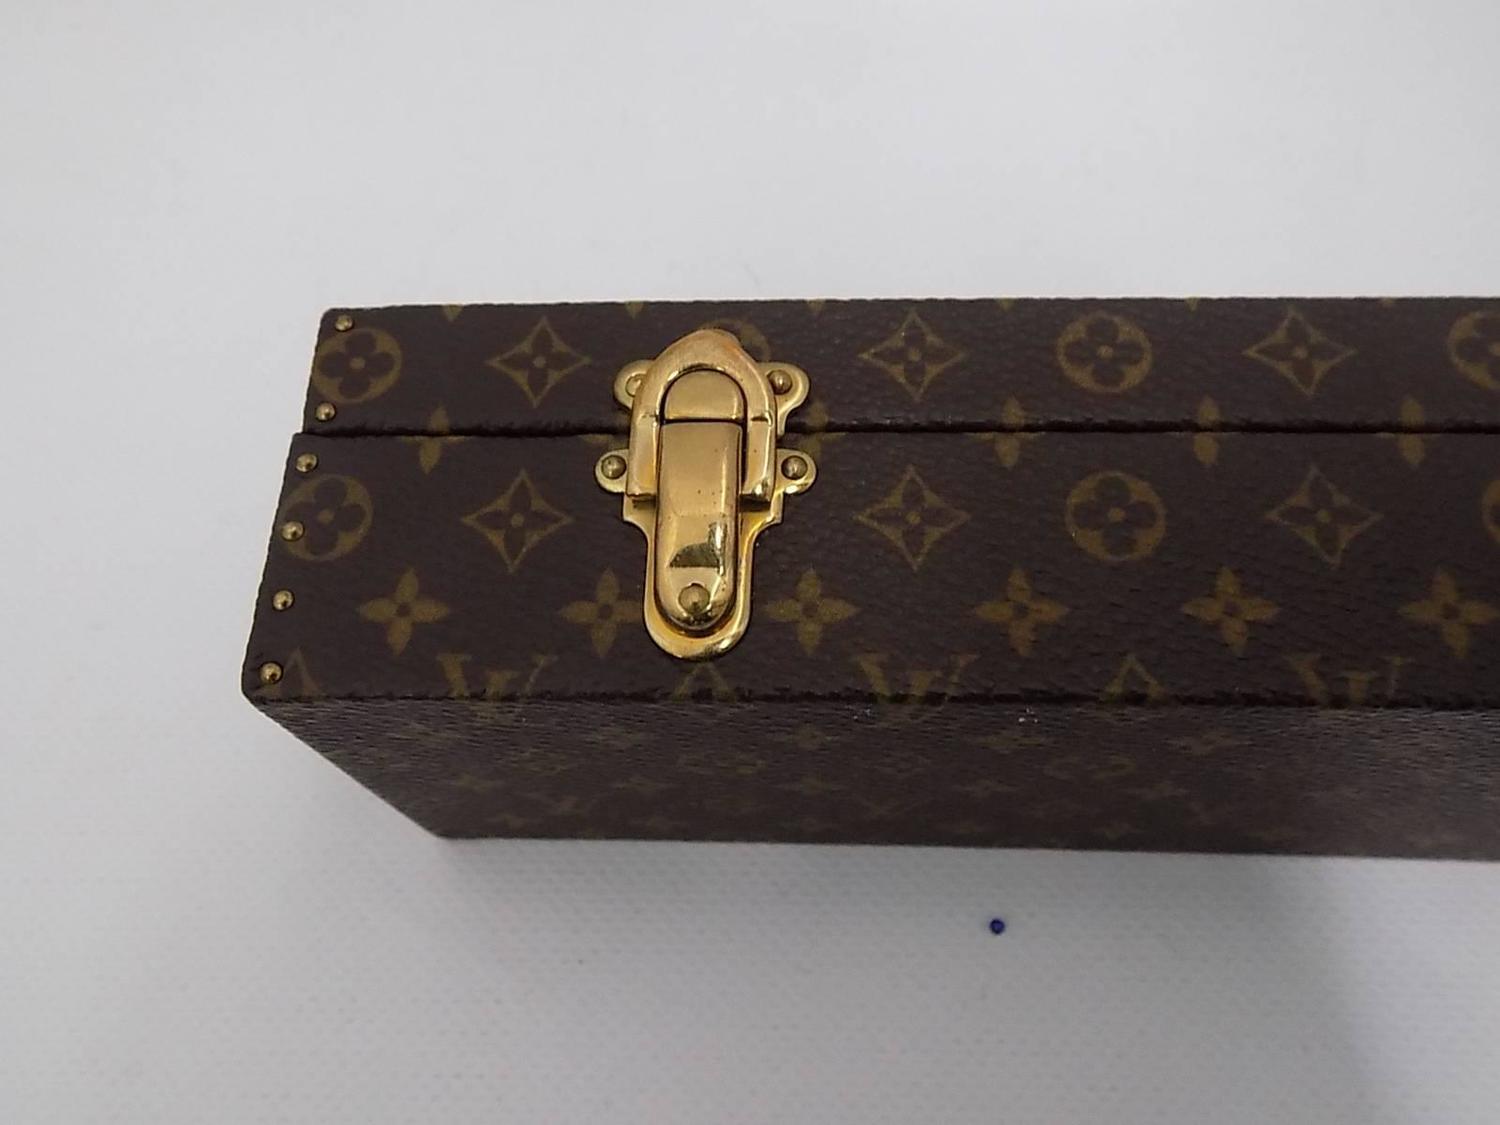 Louis Vuitton Vintage Monogram hard sided Jewelry/ Watch Trunk Case at 1stdibs